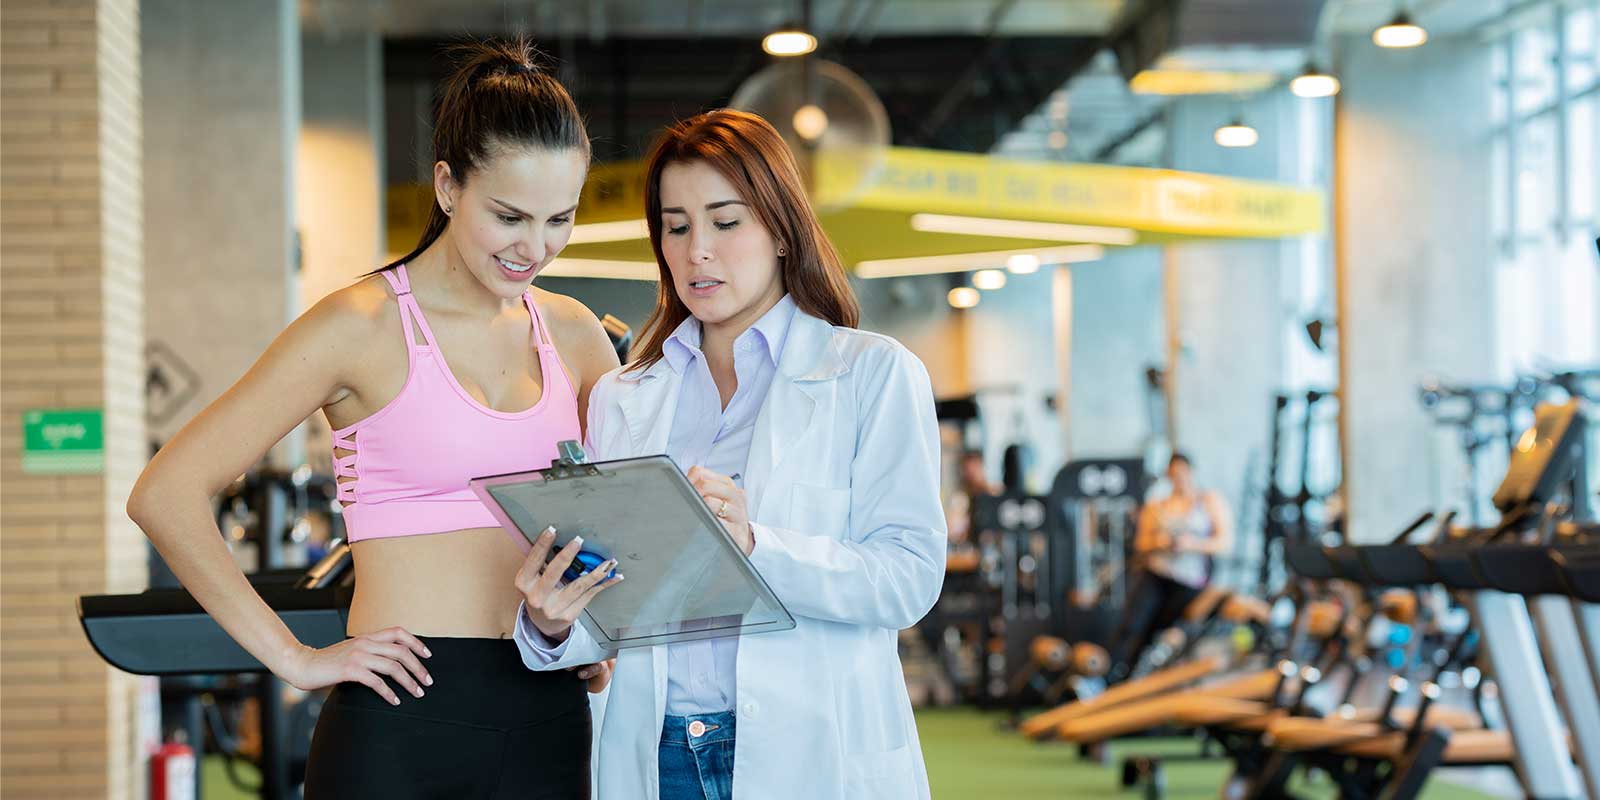 health and wellness professional talking with woman in gym